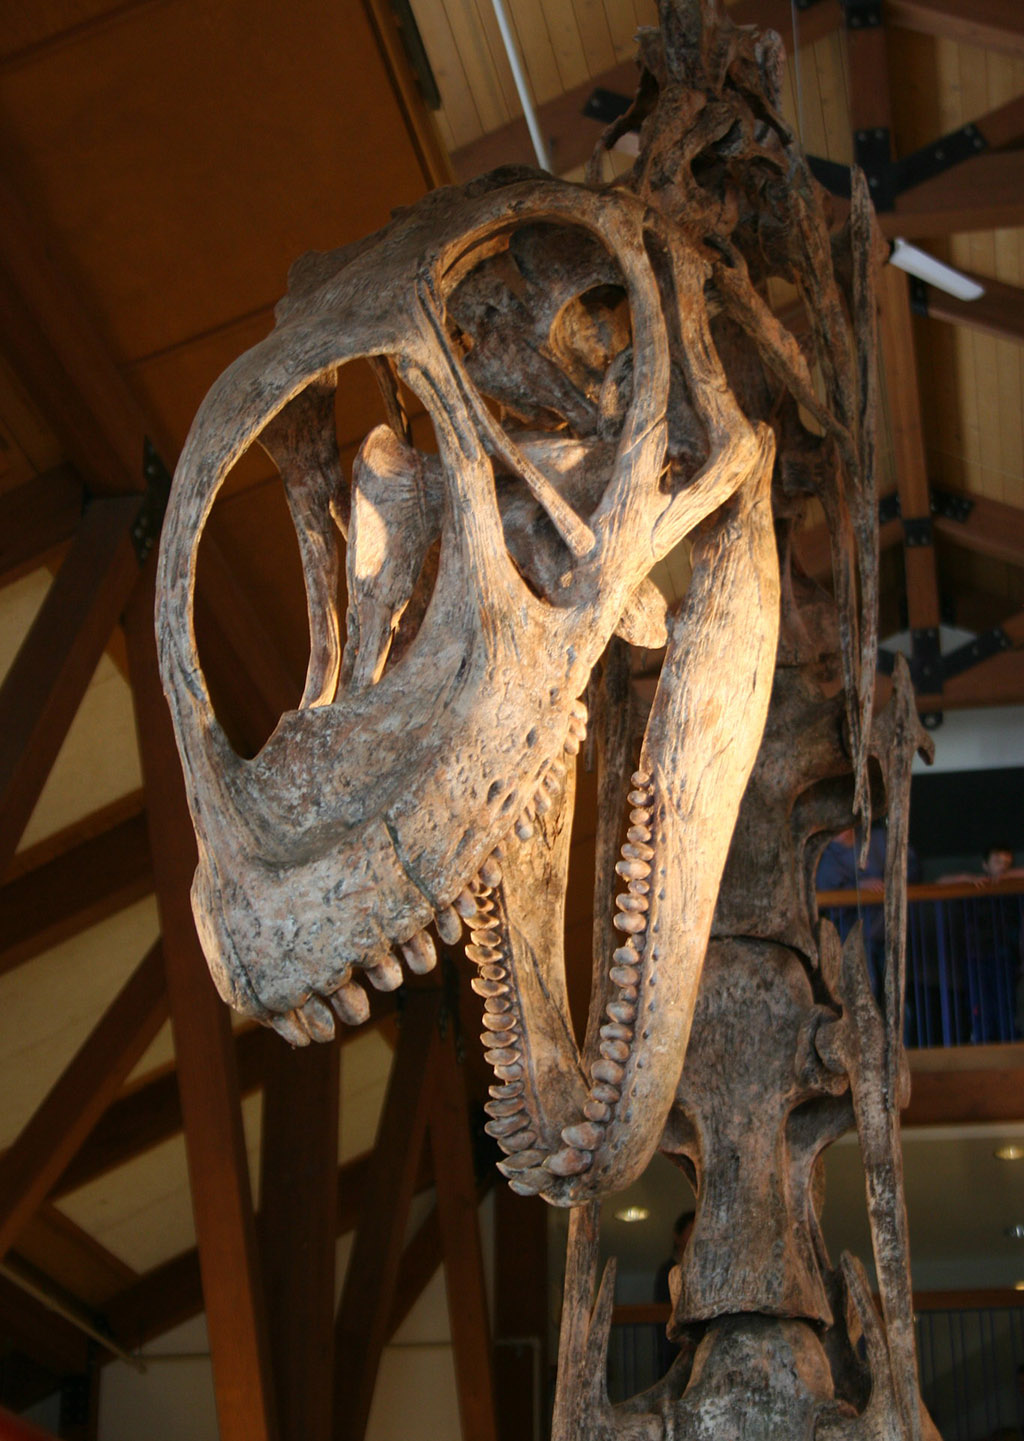 Mounted skull of a sauropod dinosaur on display at Montshire Museum of Science.